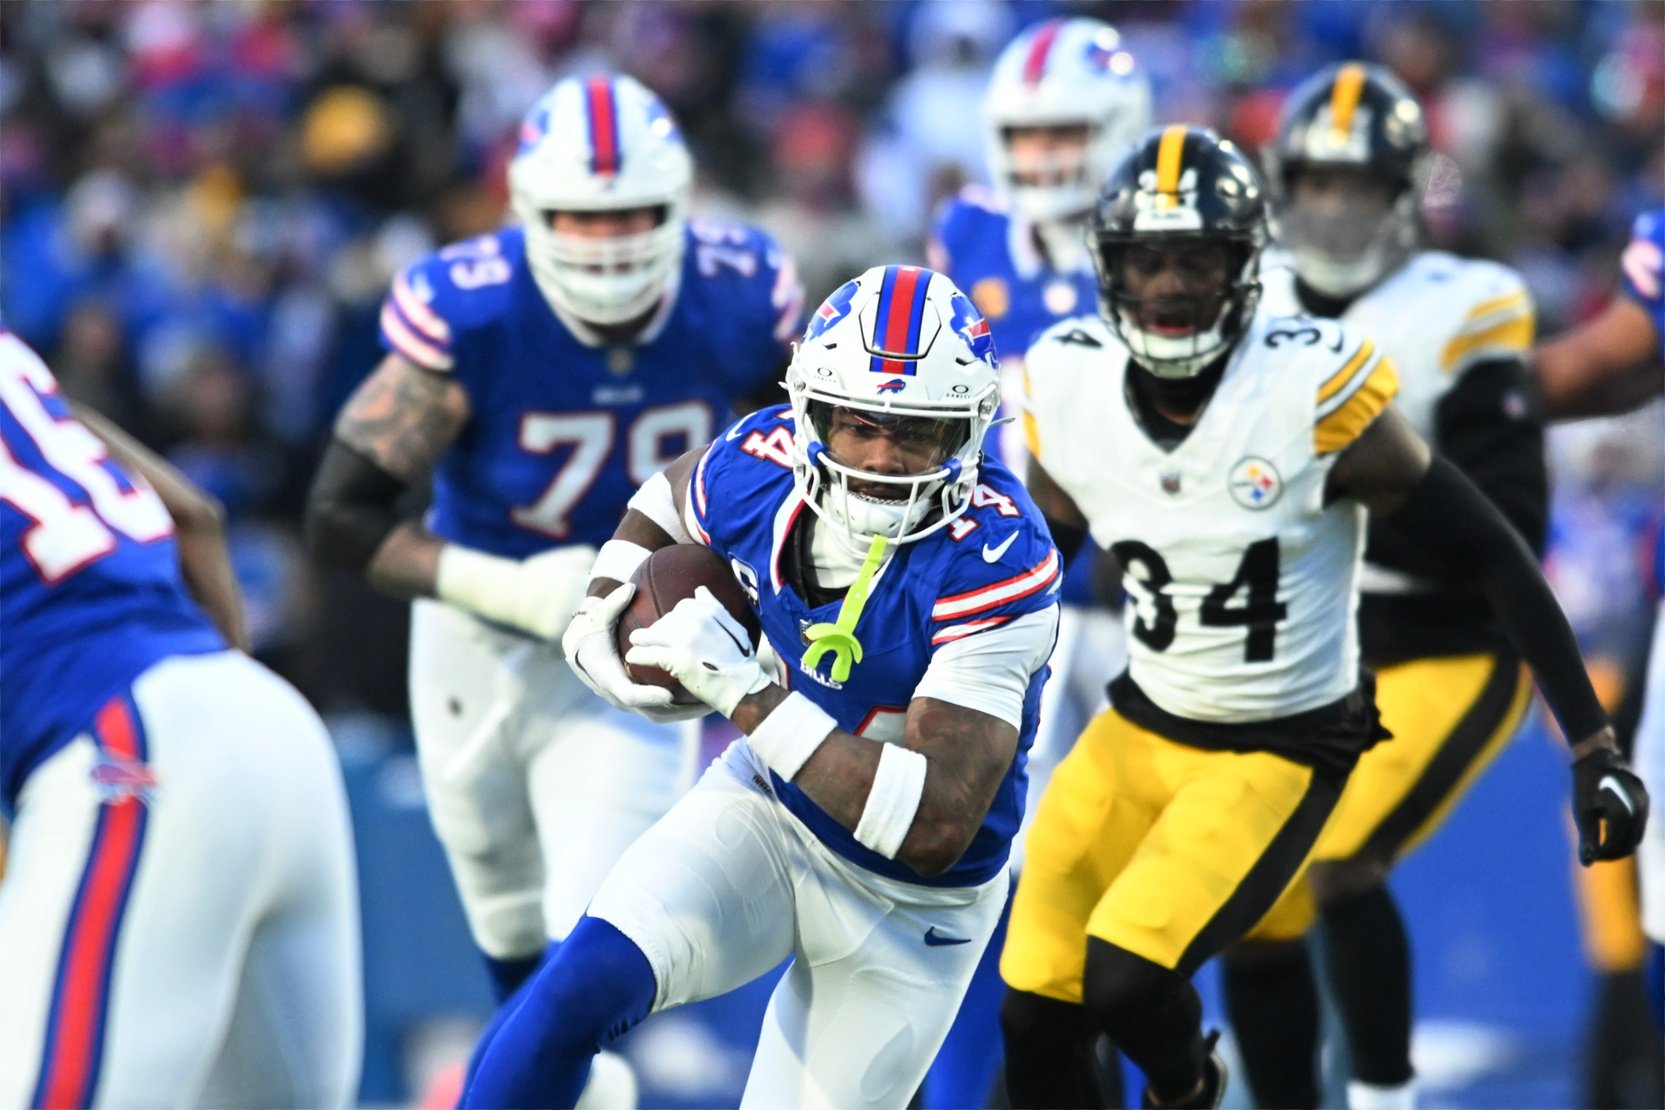 Buffalo Bills WR Stefon Diggs (14) runs after the catch against the Pittsburgh Steelers.